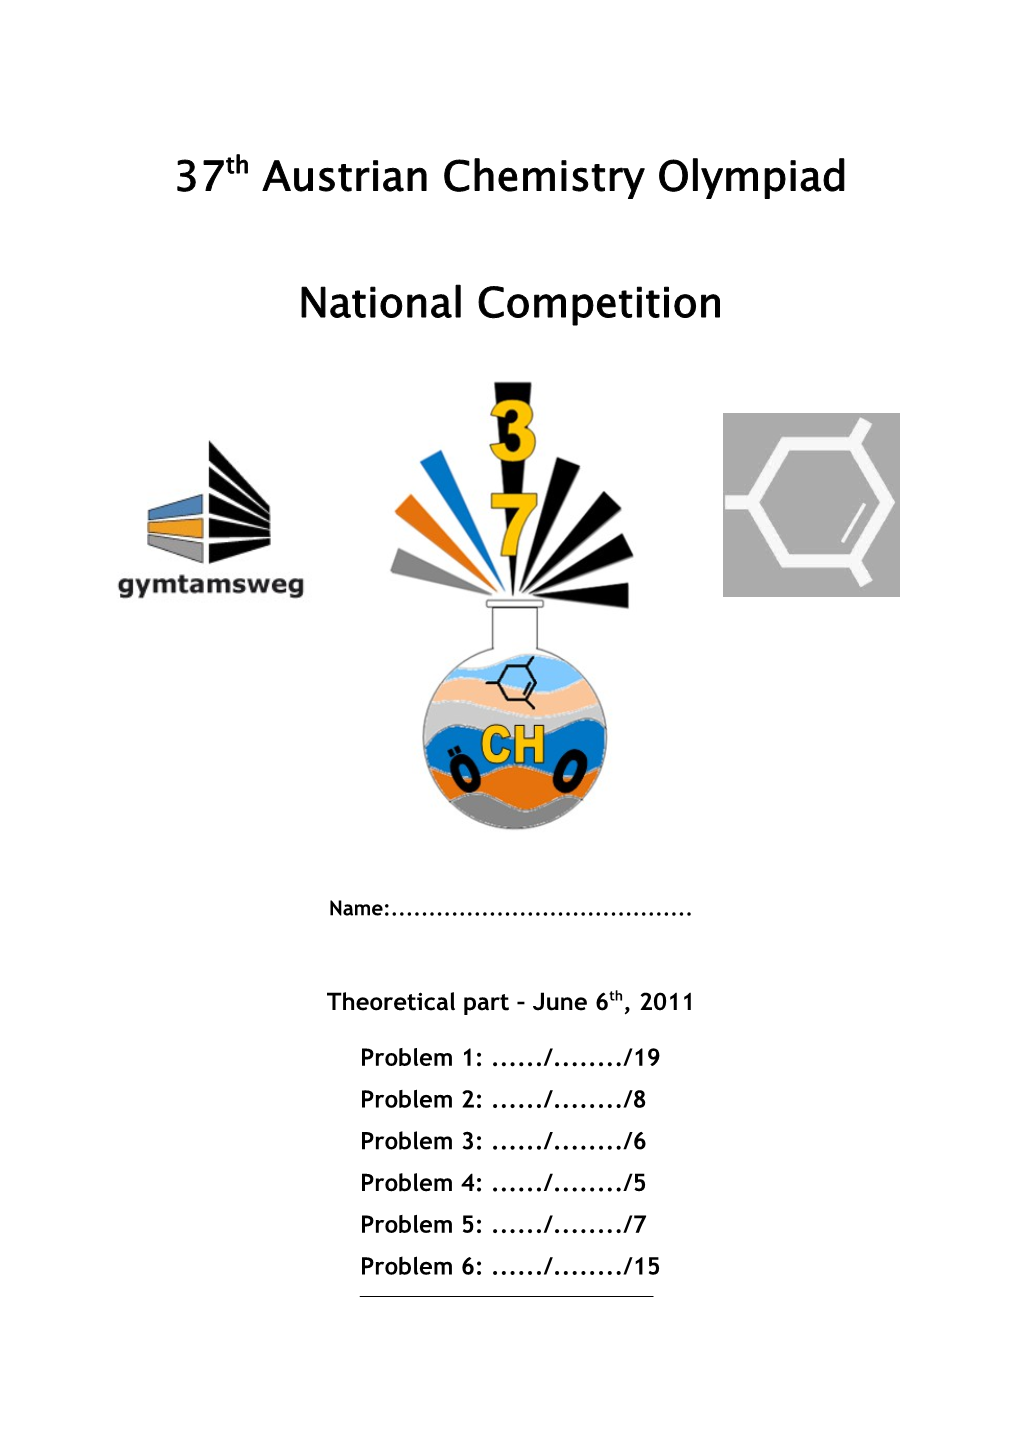 National Competition - Tamsweg